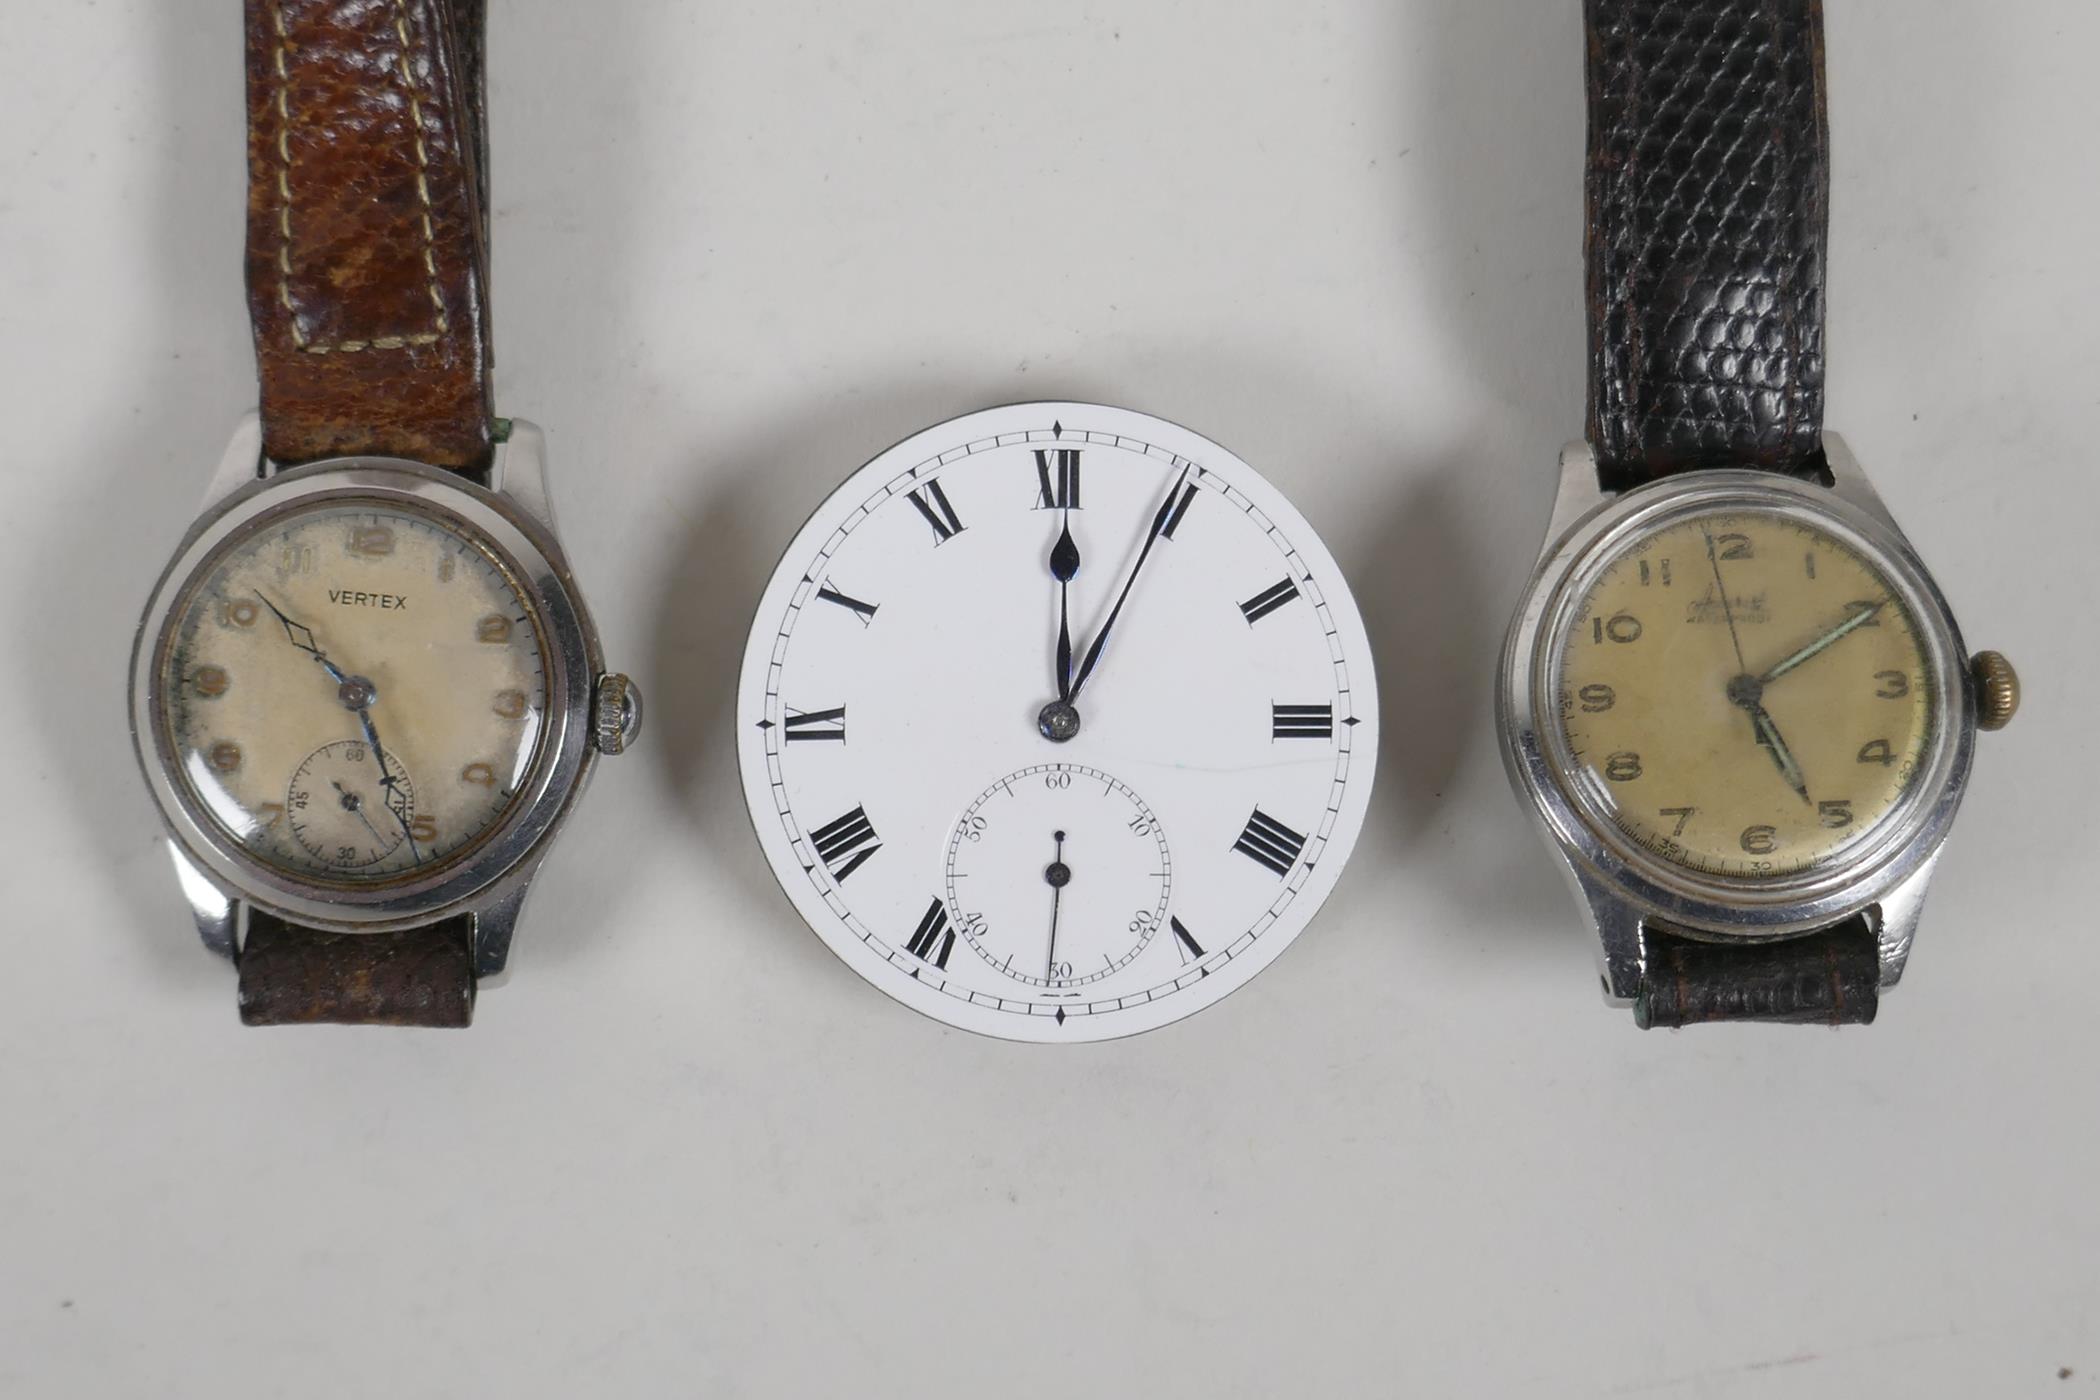 A Swiss made 17 jewel pocket watch movement, with an enamel face and a subsidiary second dial.